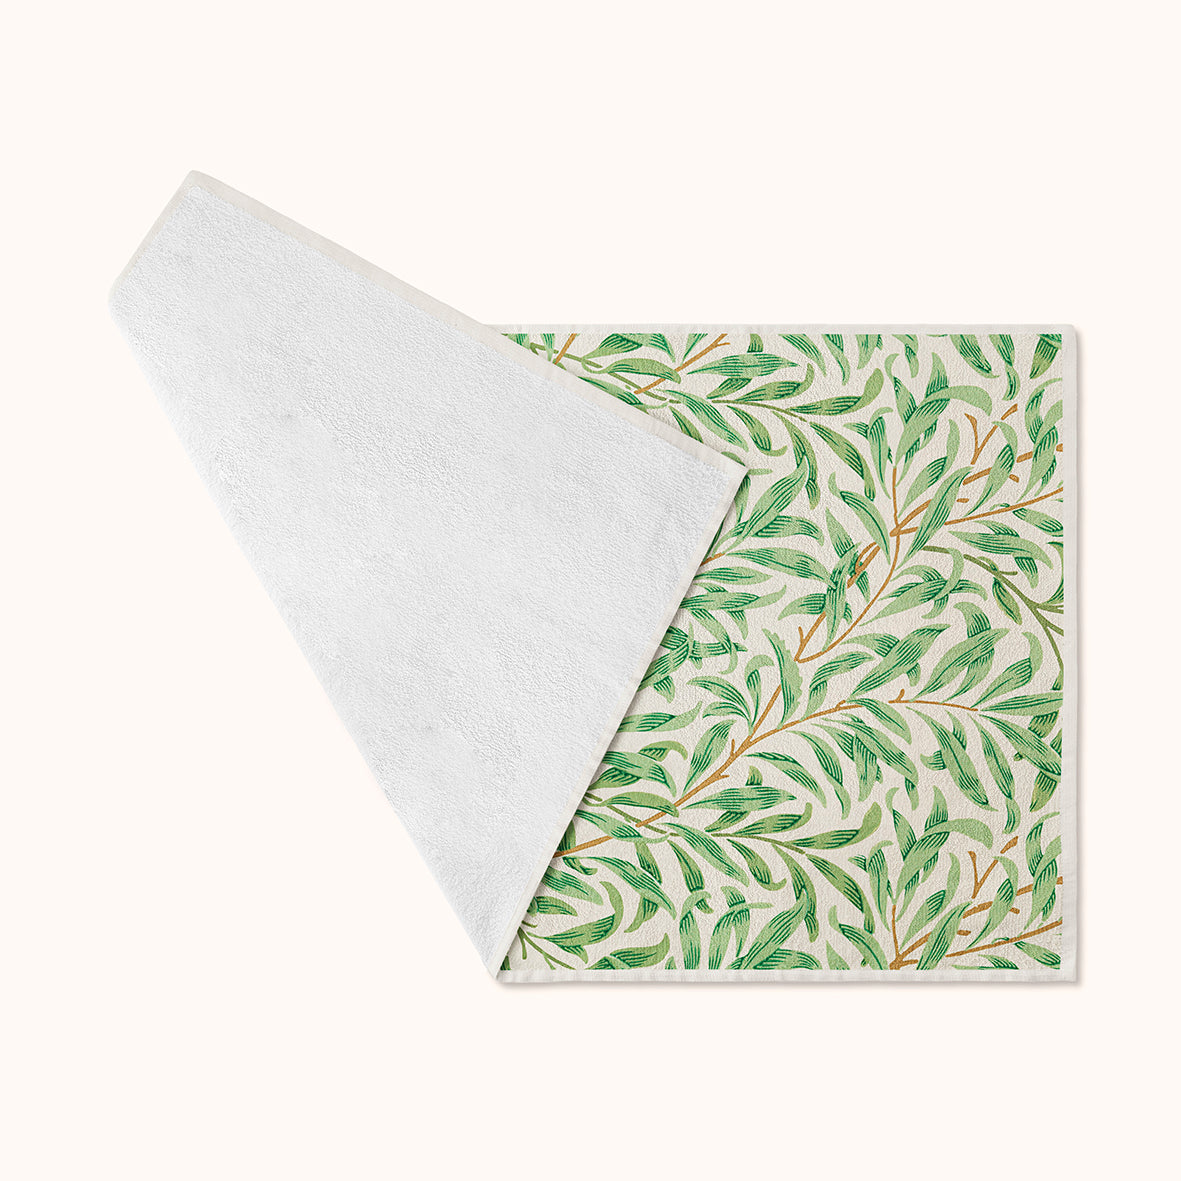 William Morris & Co Luxury Polycotton Towel - Willow Collection